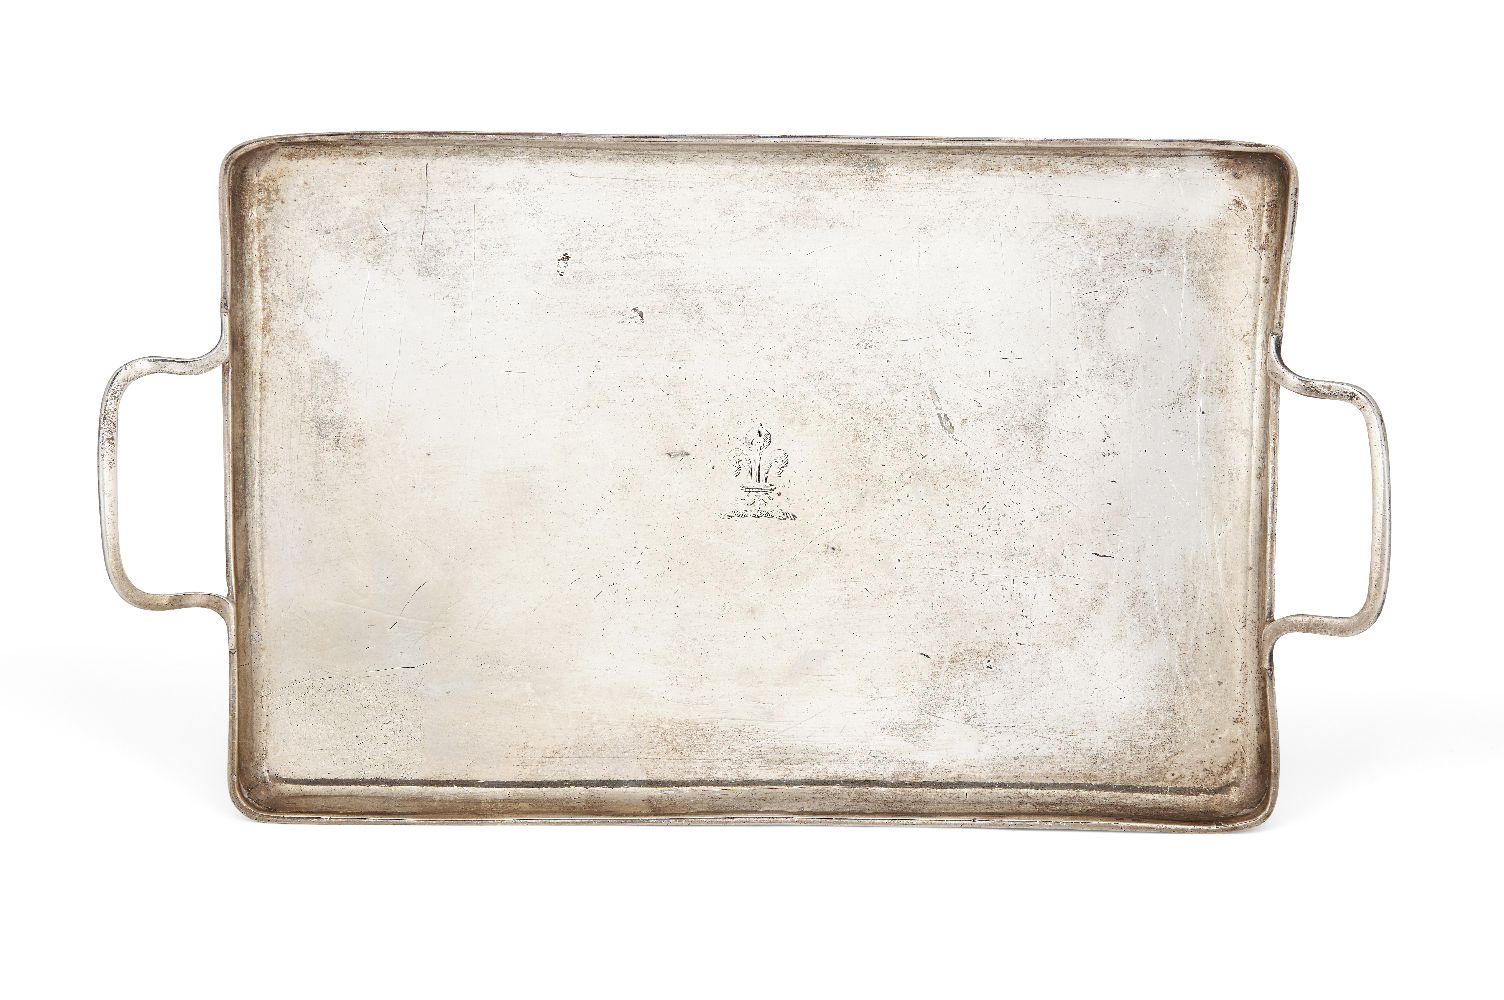 A small George III silver tray, London 1791, maker's mark rubbed, of plain, rectangular form with